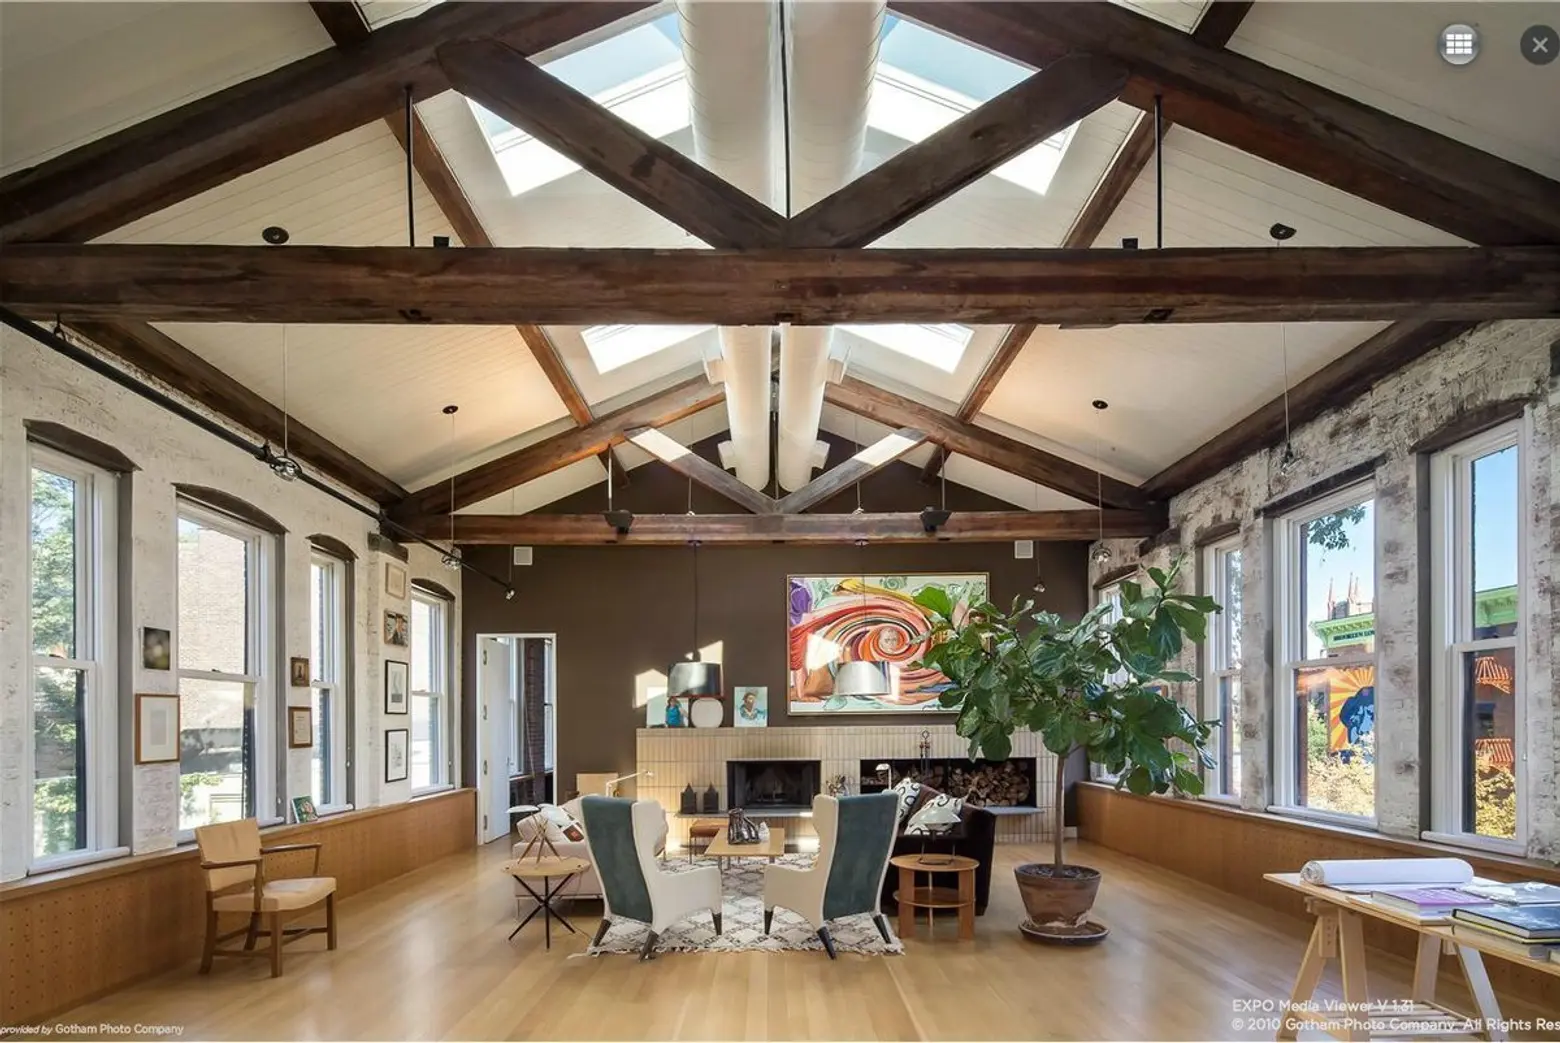 Artist David Salle Lists Home for $13M; What the World’s Richest One Percent Earn